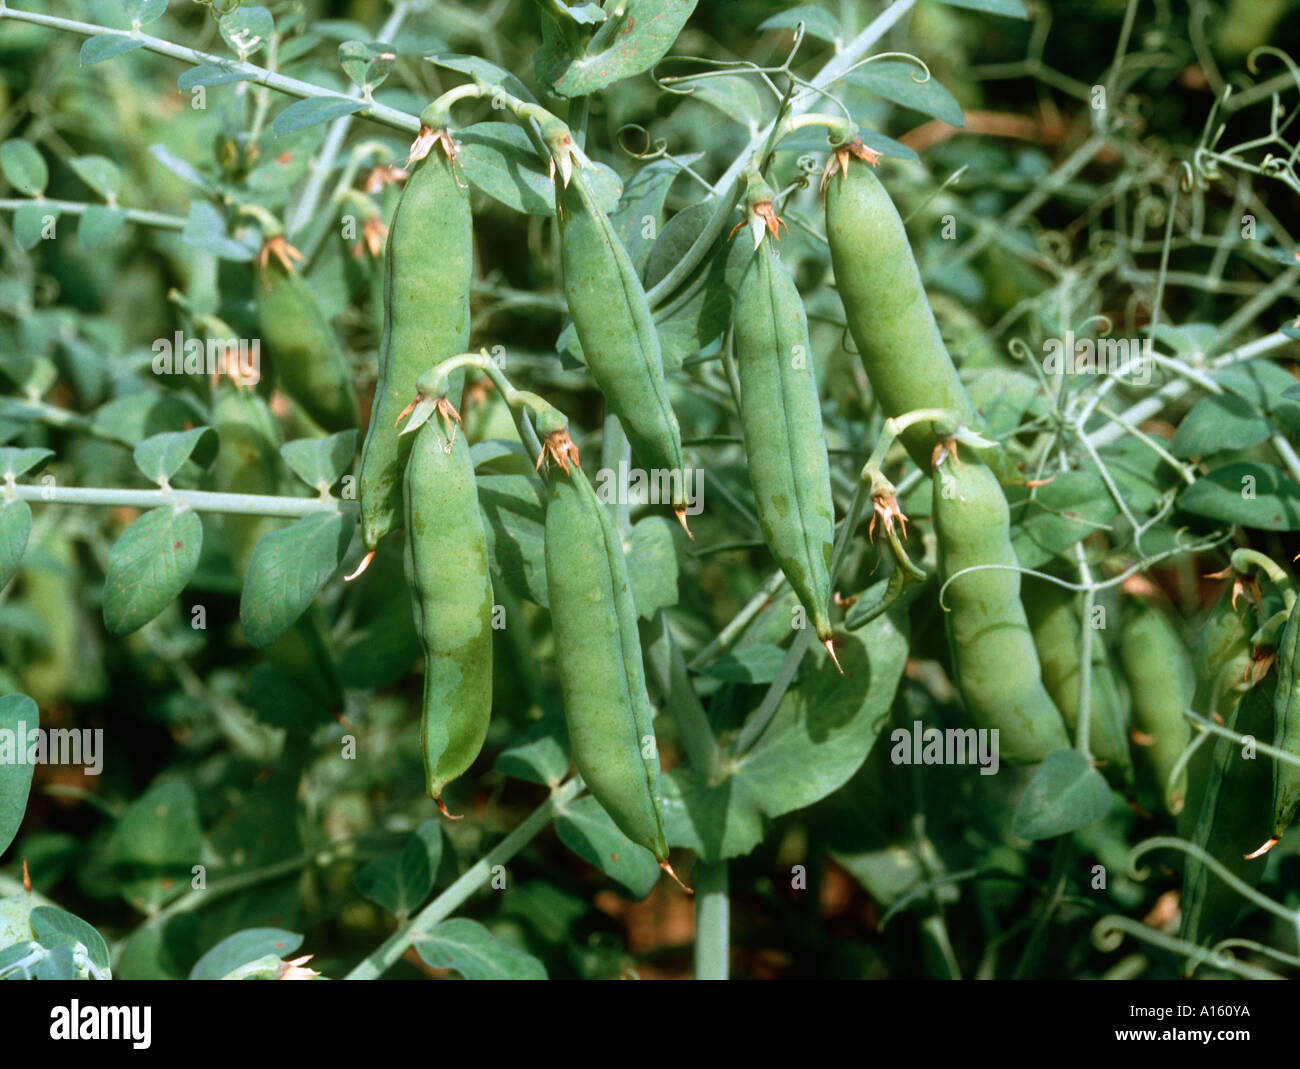 Mature pea pods on the plant before harvest Stock Photo